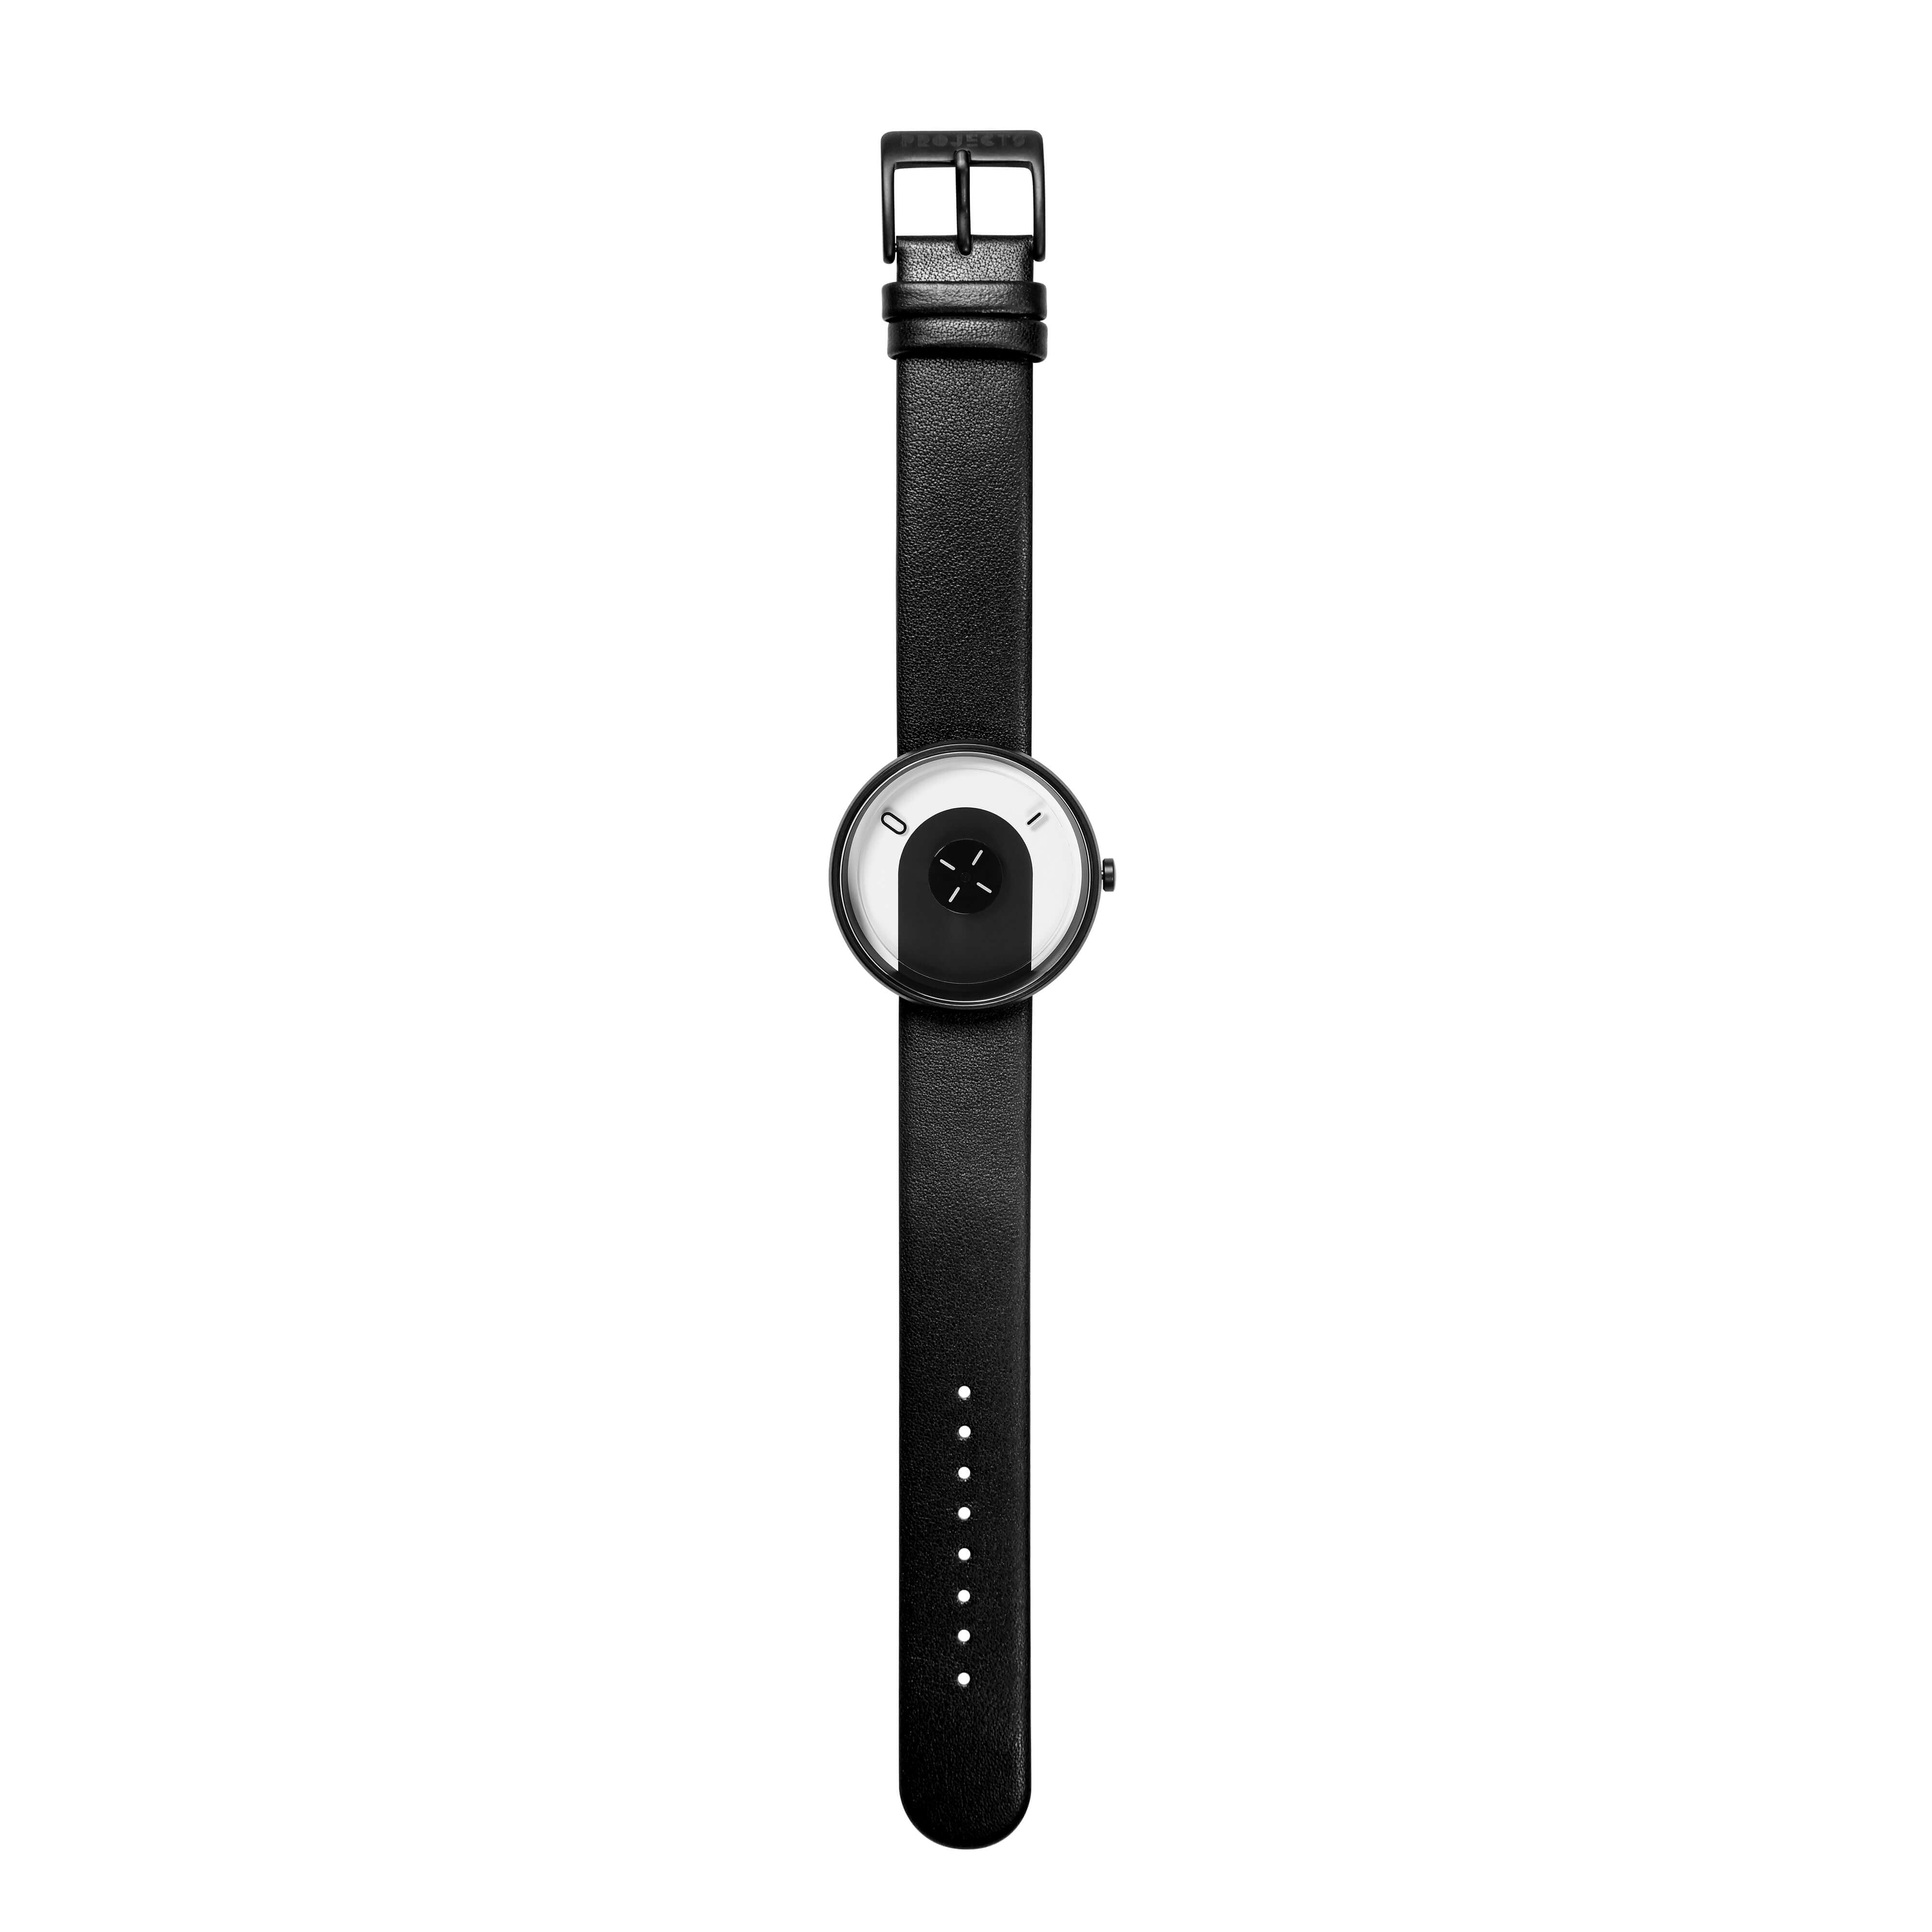 The Overlap Watch is full of quirky minimalism - Yanko Design | Watch  design, Modern watches, Watches for men